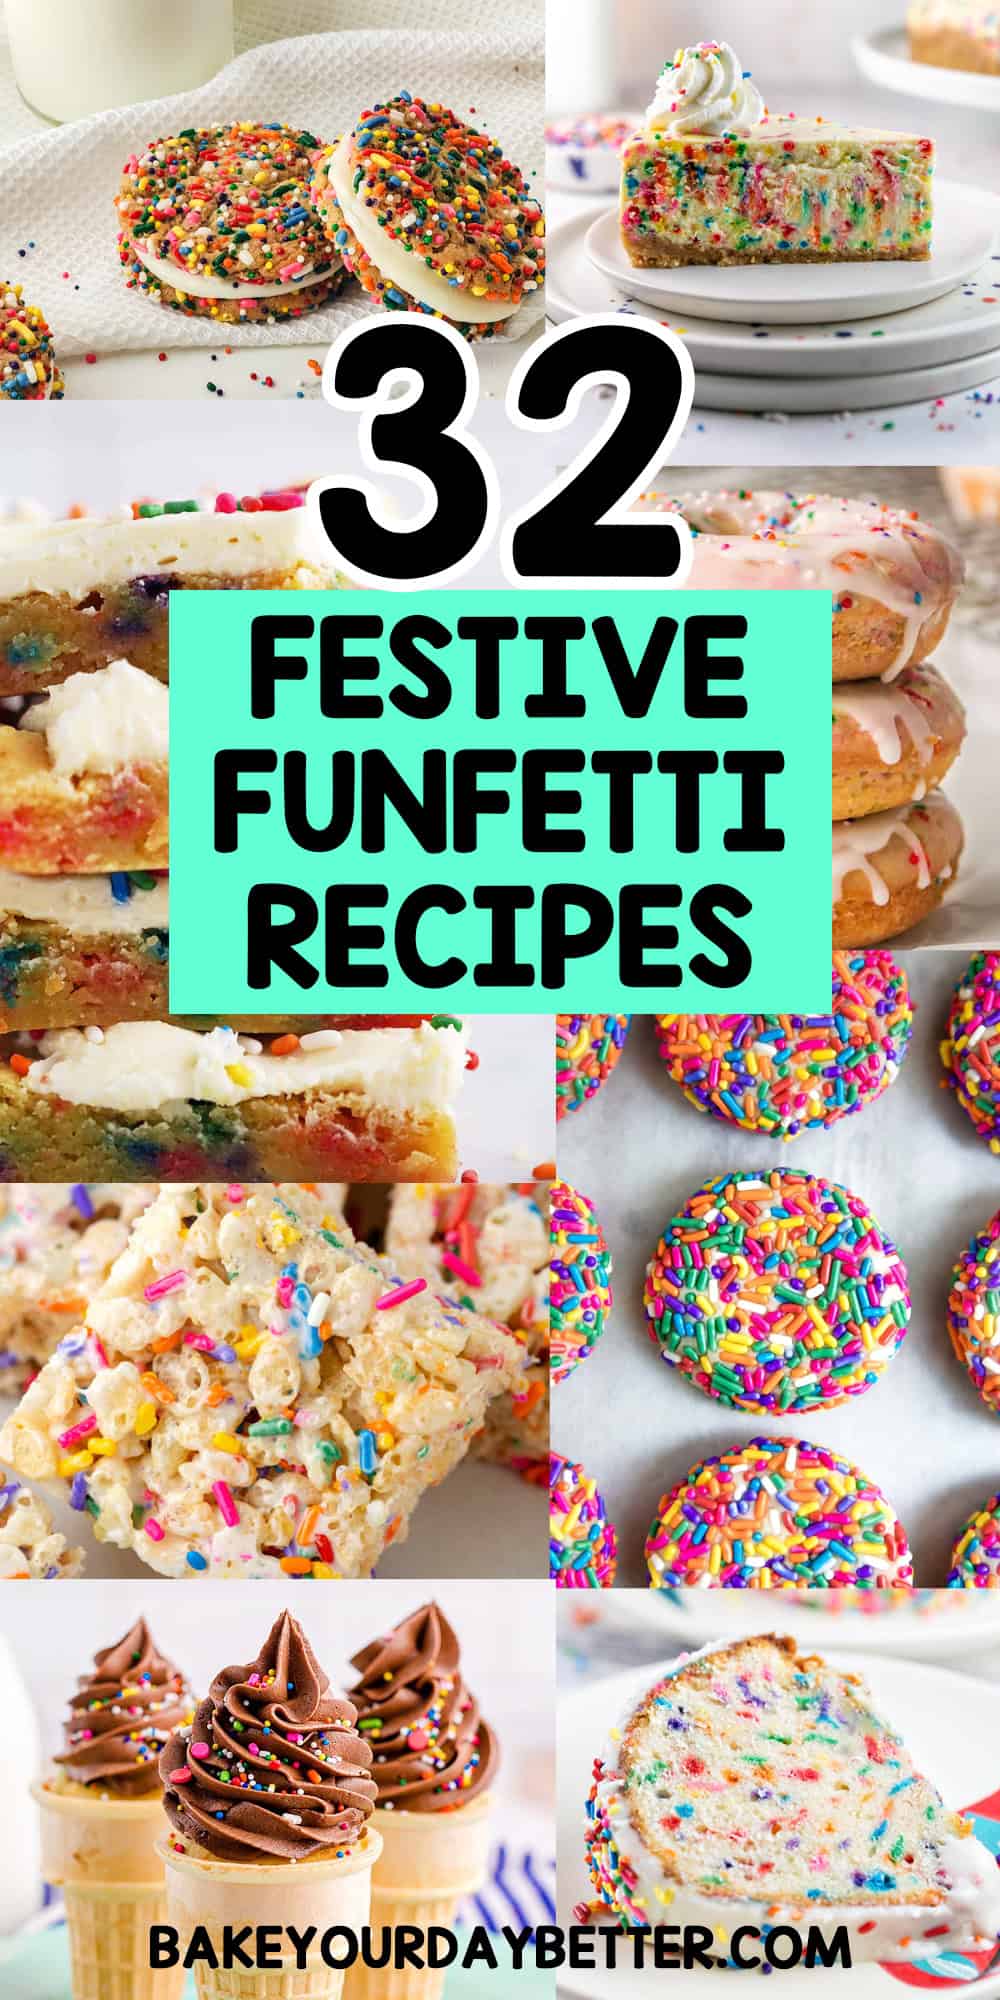 pictures of various funfetti desserts with text overlay that says: 32 festive funfetti recipes